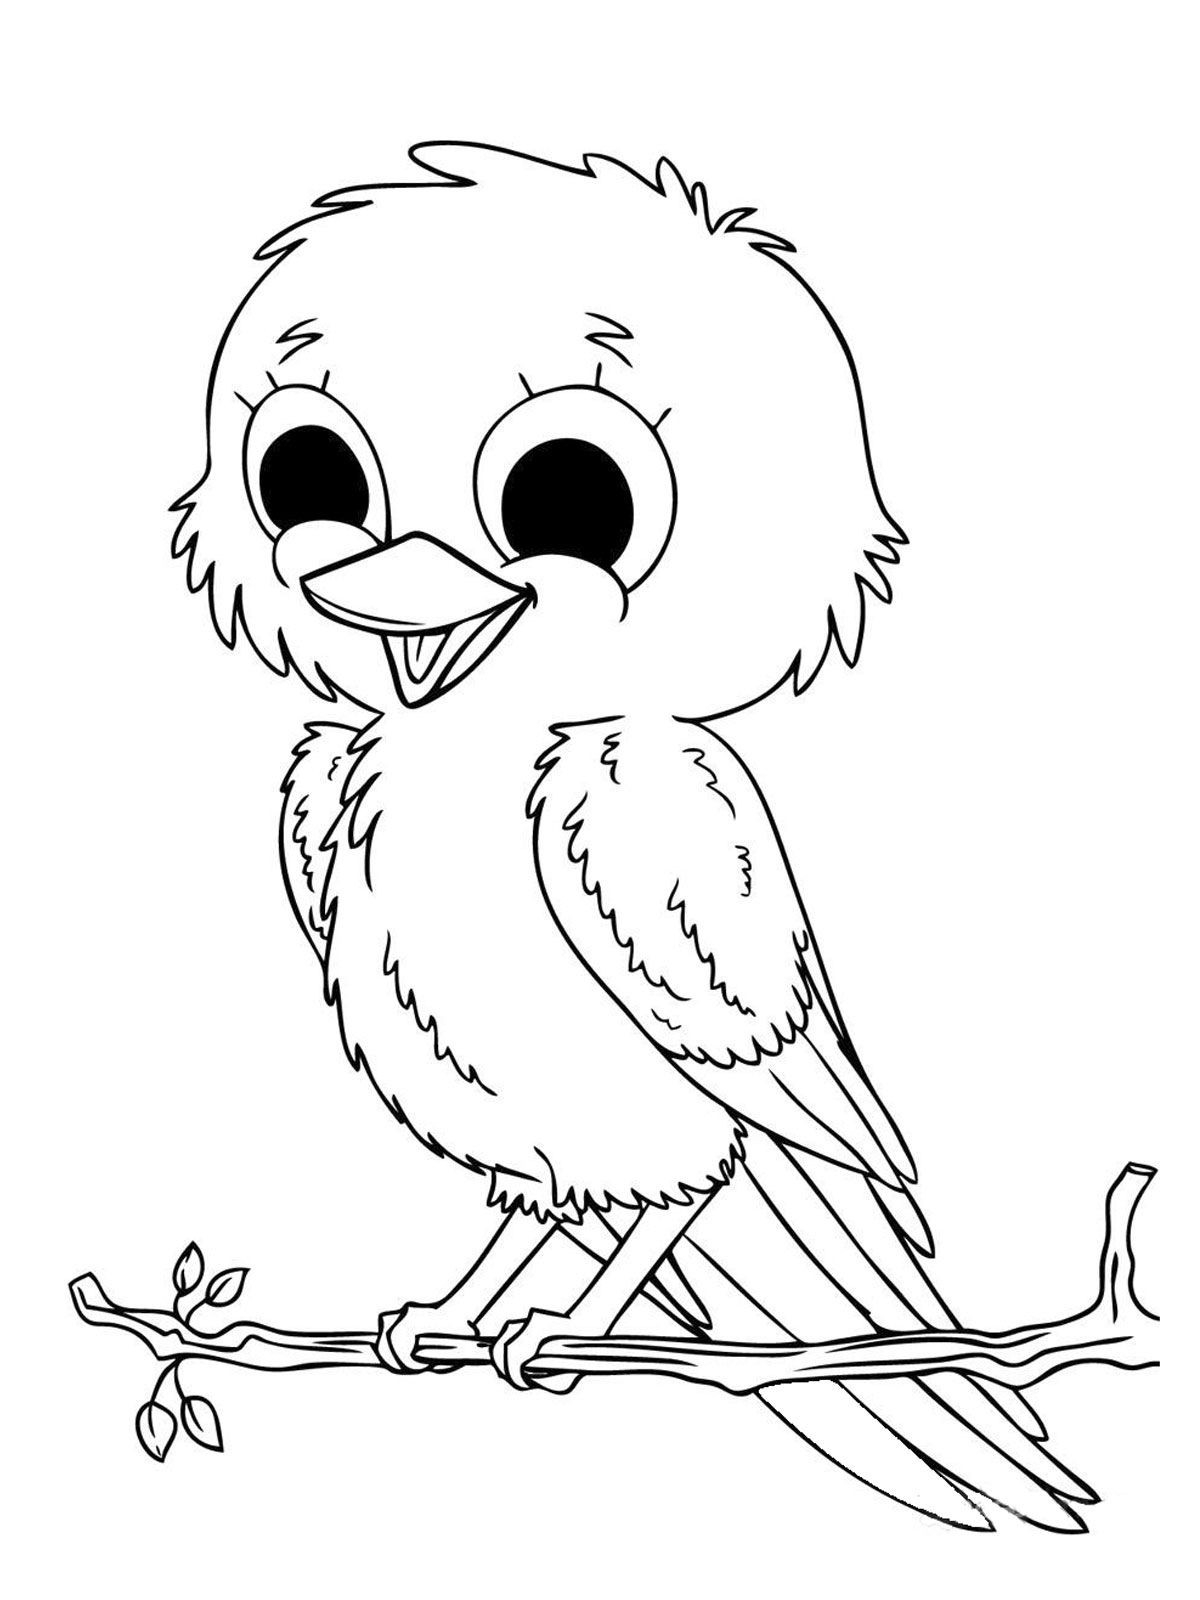 Baby Animals Coloring Book Inspirationa Free Coloring Pages - Free Printable Pictures Of Baby Animals